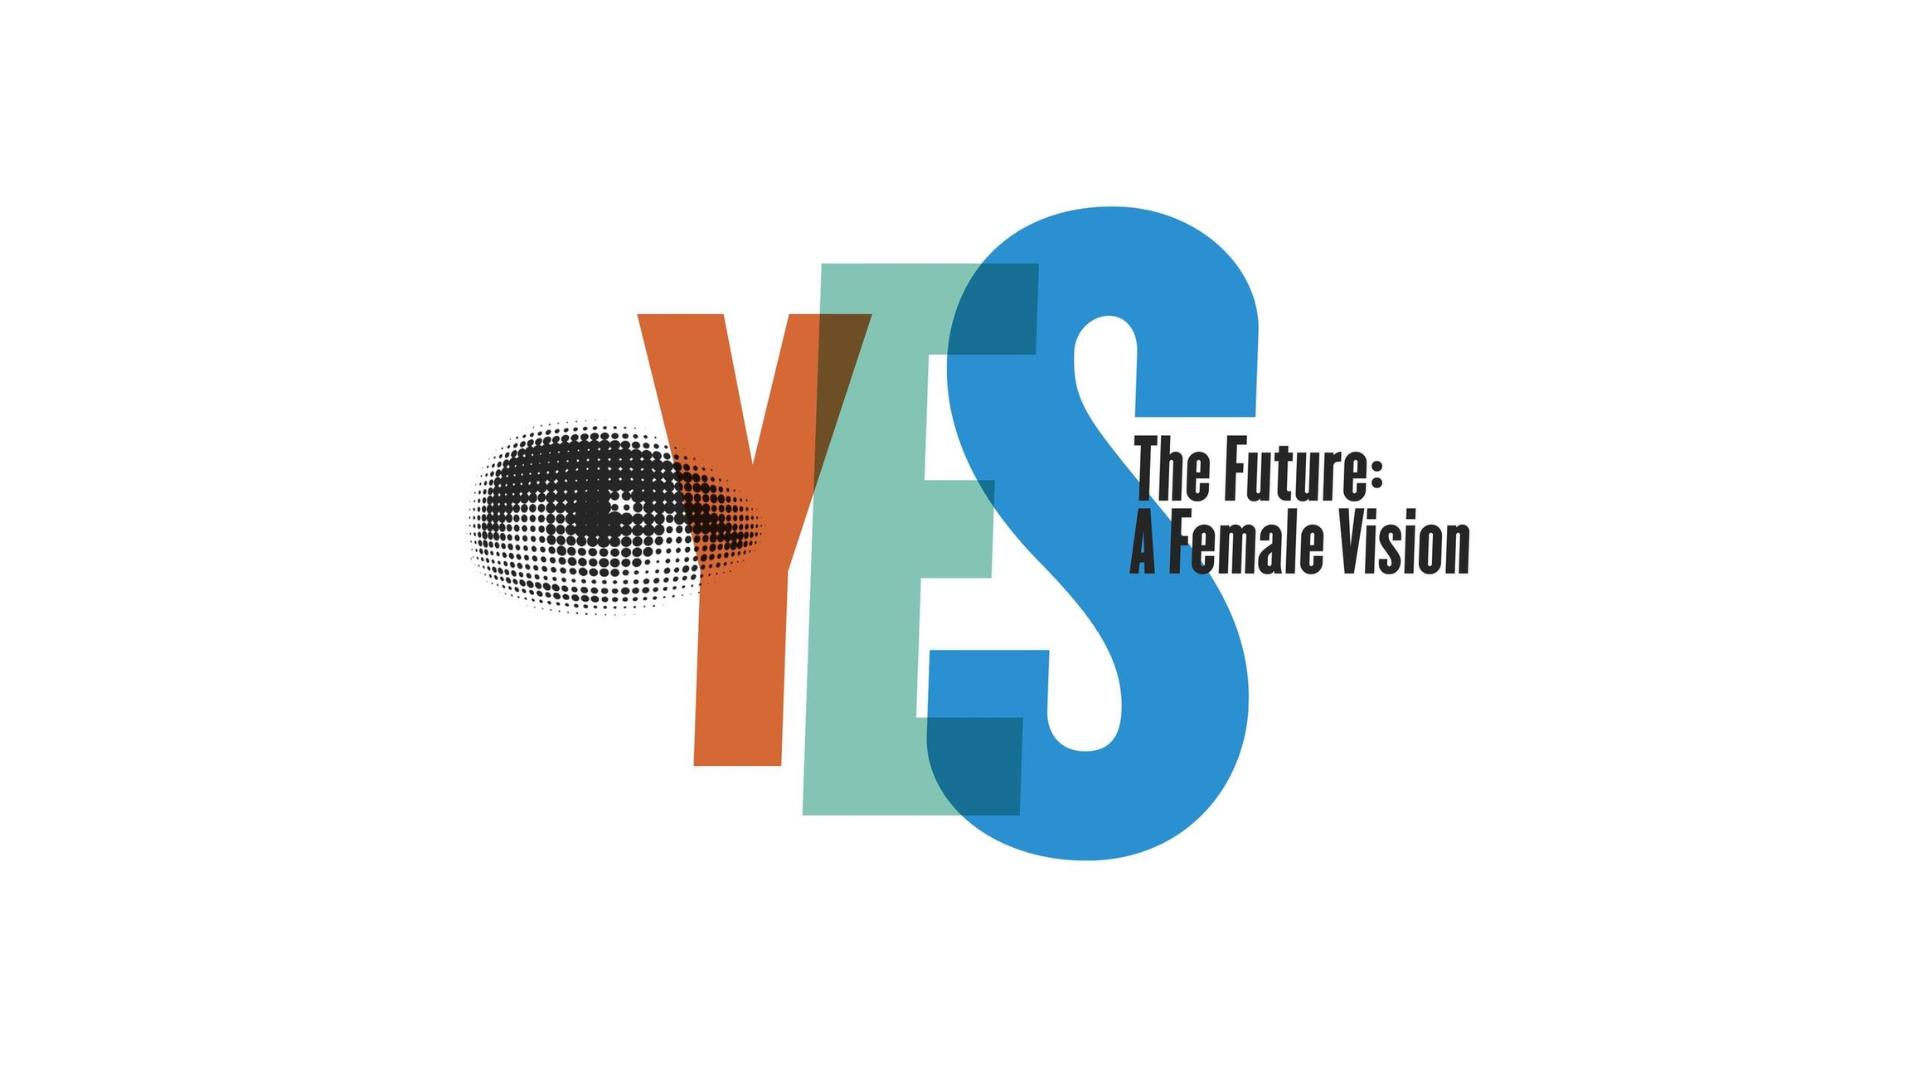 The logo for the YES Festival, saying 'The Future: A Female Vision'